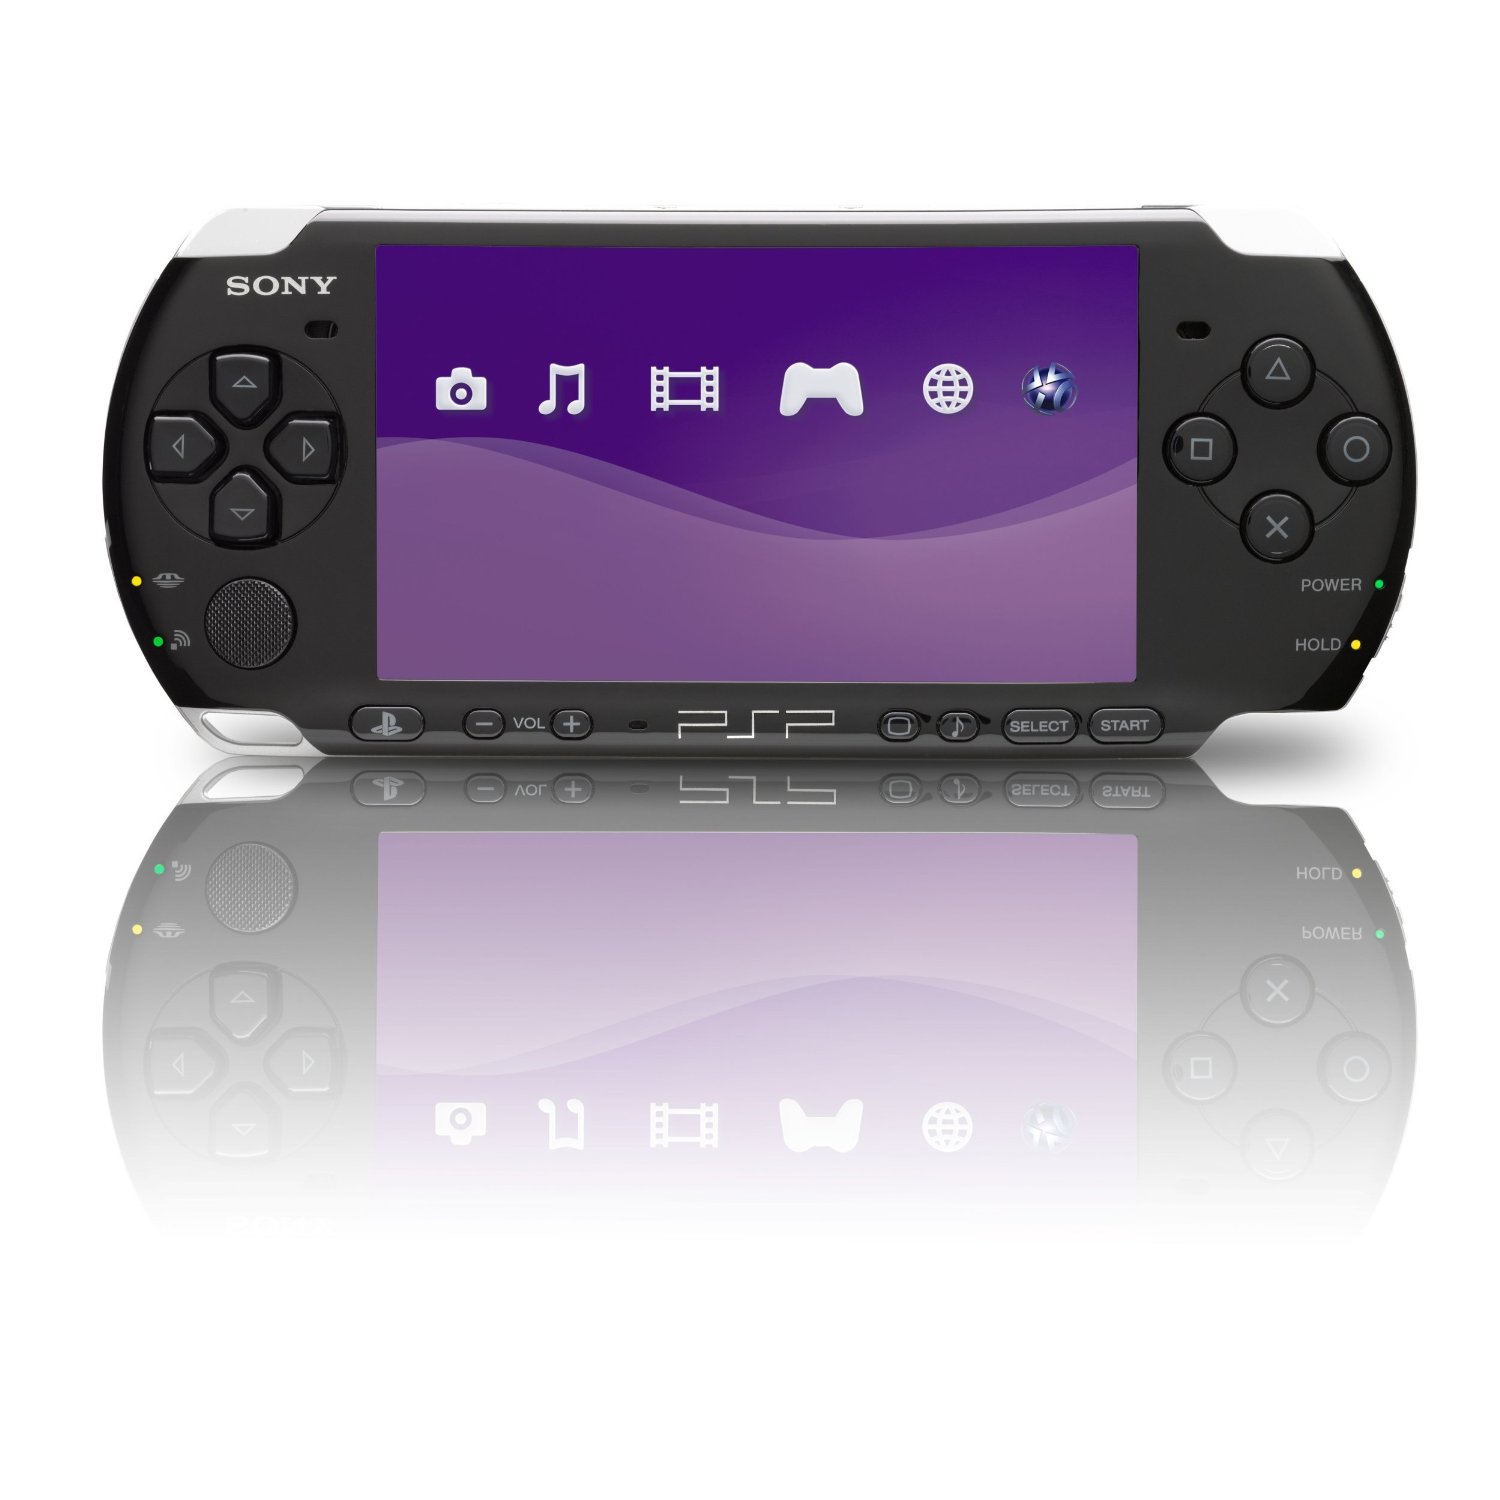 PSP Black Friday 2012 & Cyber Monday PSP Sale with Free Shipping.Special Offer on Black Friday PlayStation Portable&Cyber Monday PSP 3000 2012 Sales Soulsis